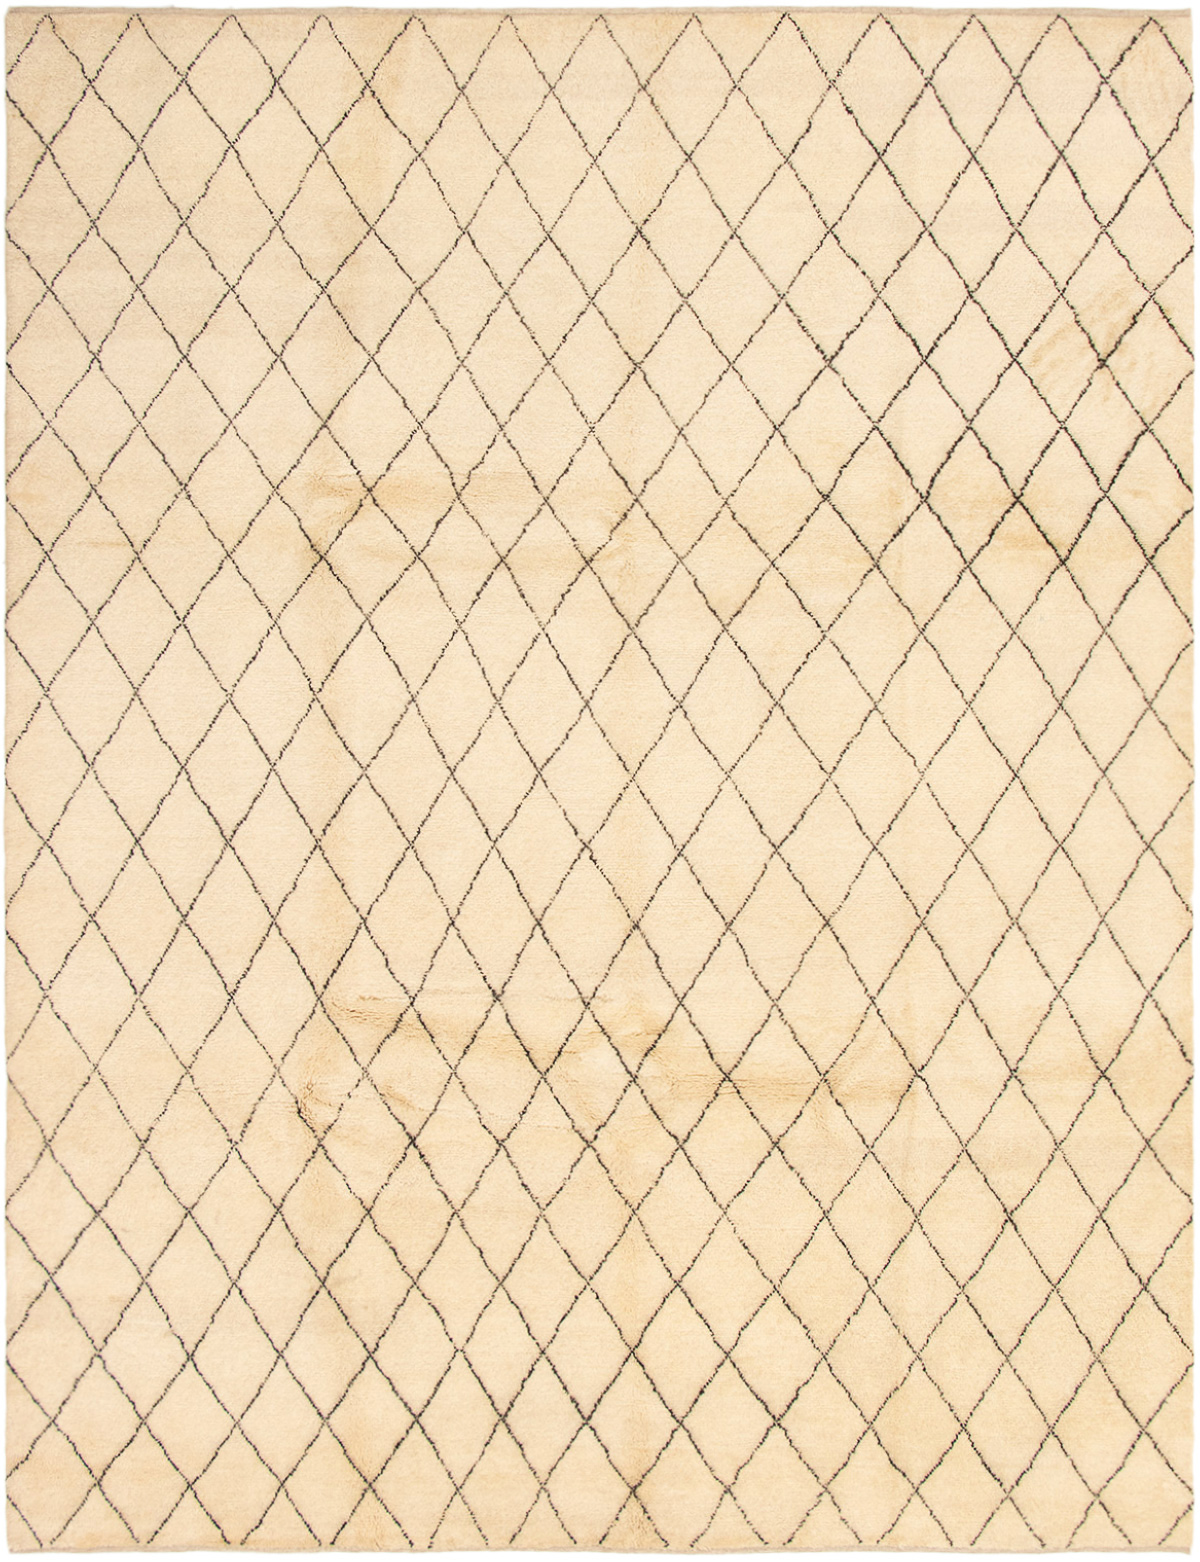 Hand-knotted Arlequin Cream Wool Rug 9'2" x 12'0"  Size: 9'2" x 12'0"  